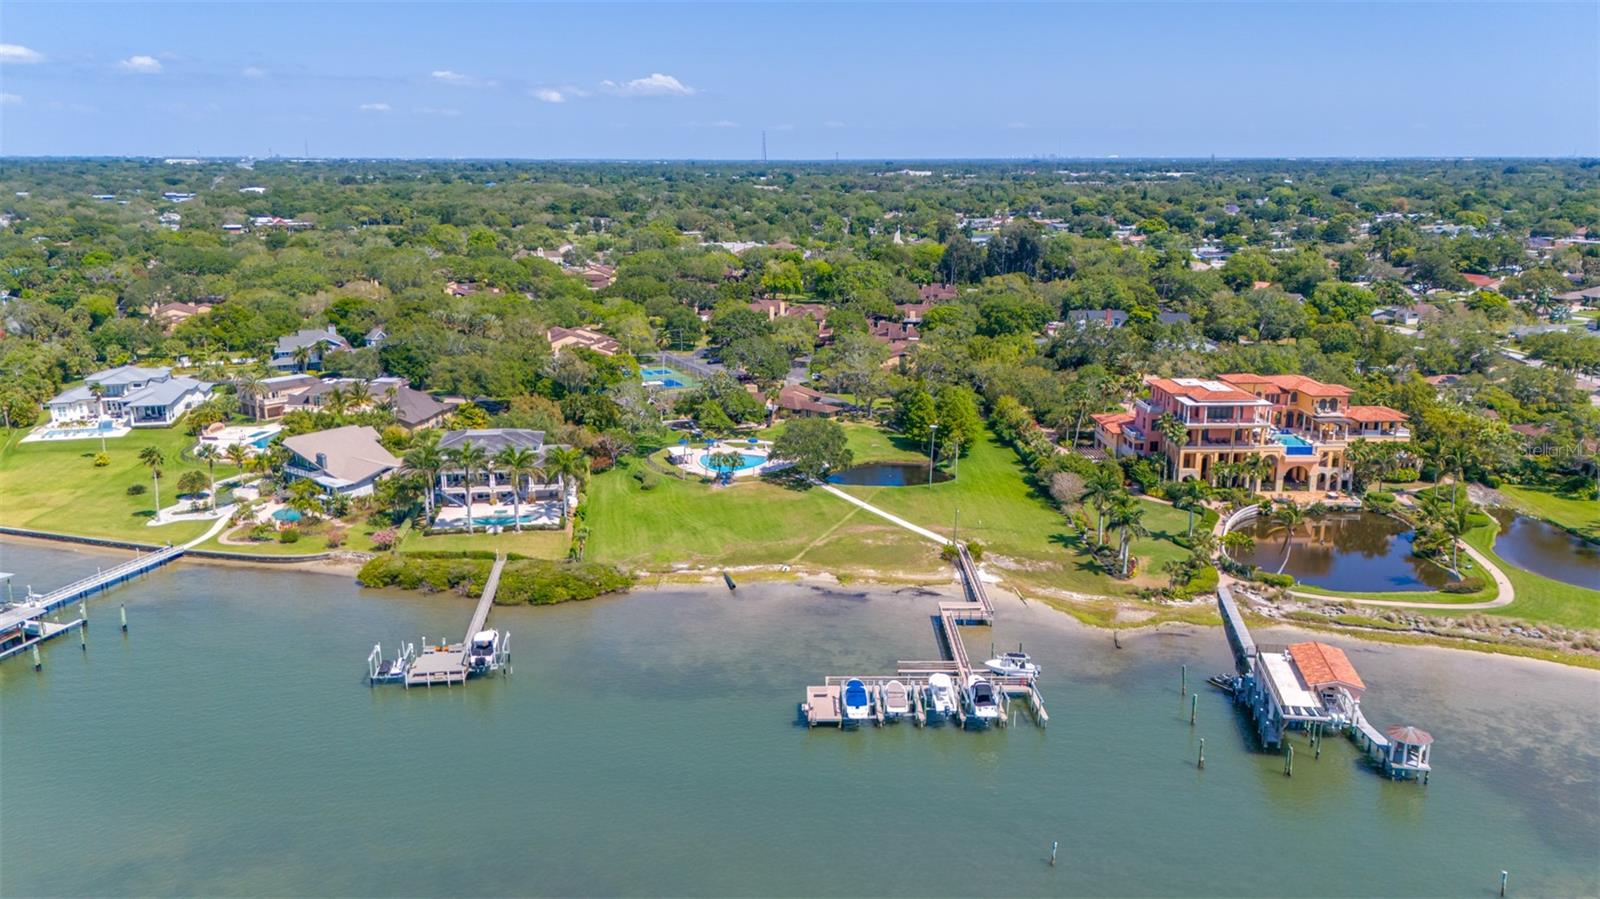 Aerial view from Intracoastal, push in from shoreline with paddleboard